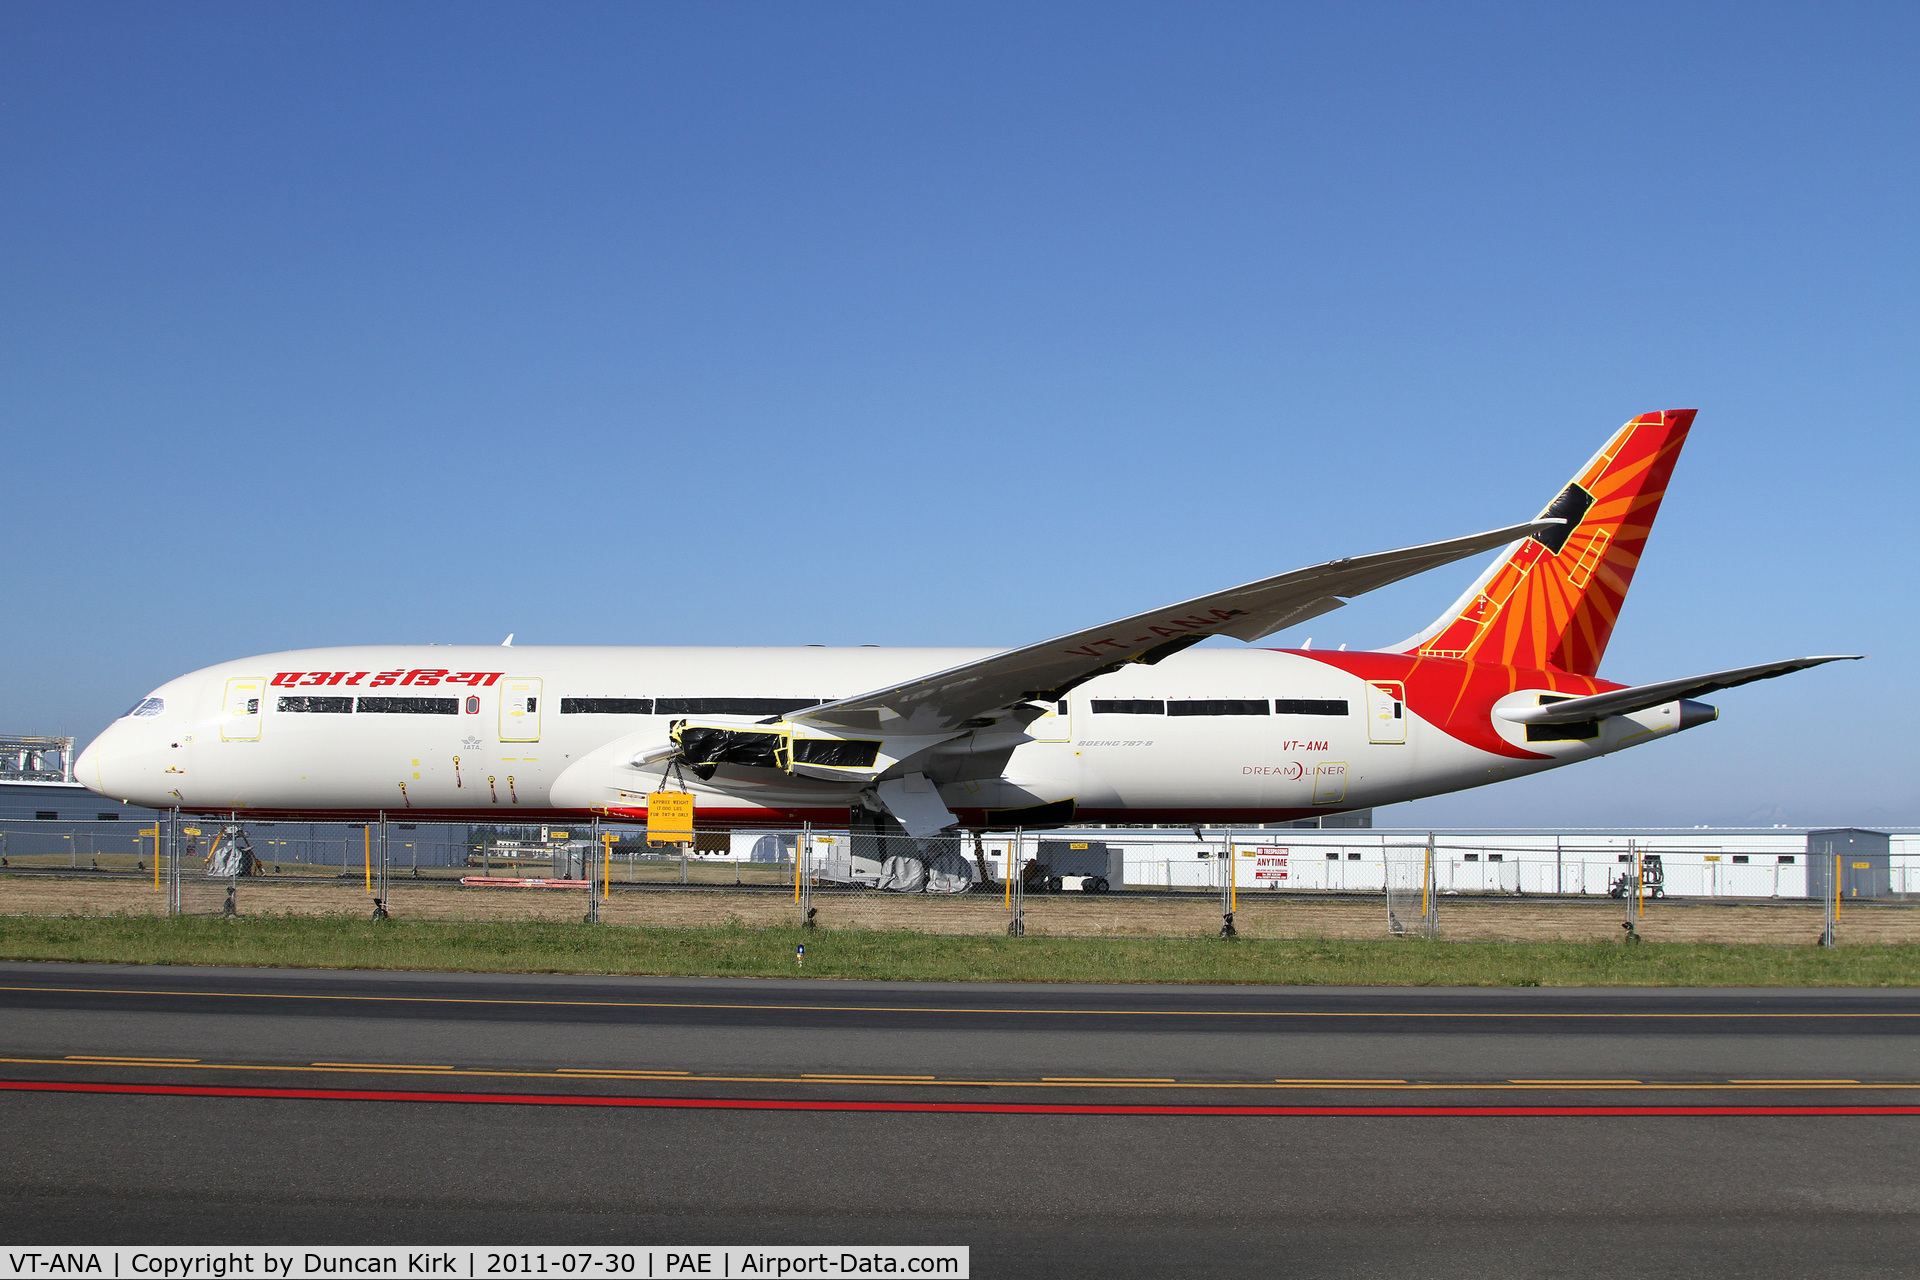 VT-ANA, 2011 Boeing 787-8 Dreamliner C/N 36273, The first 787 for Air India minus engines and in storage on Runway 29-11